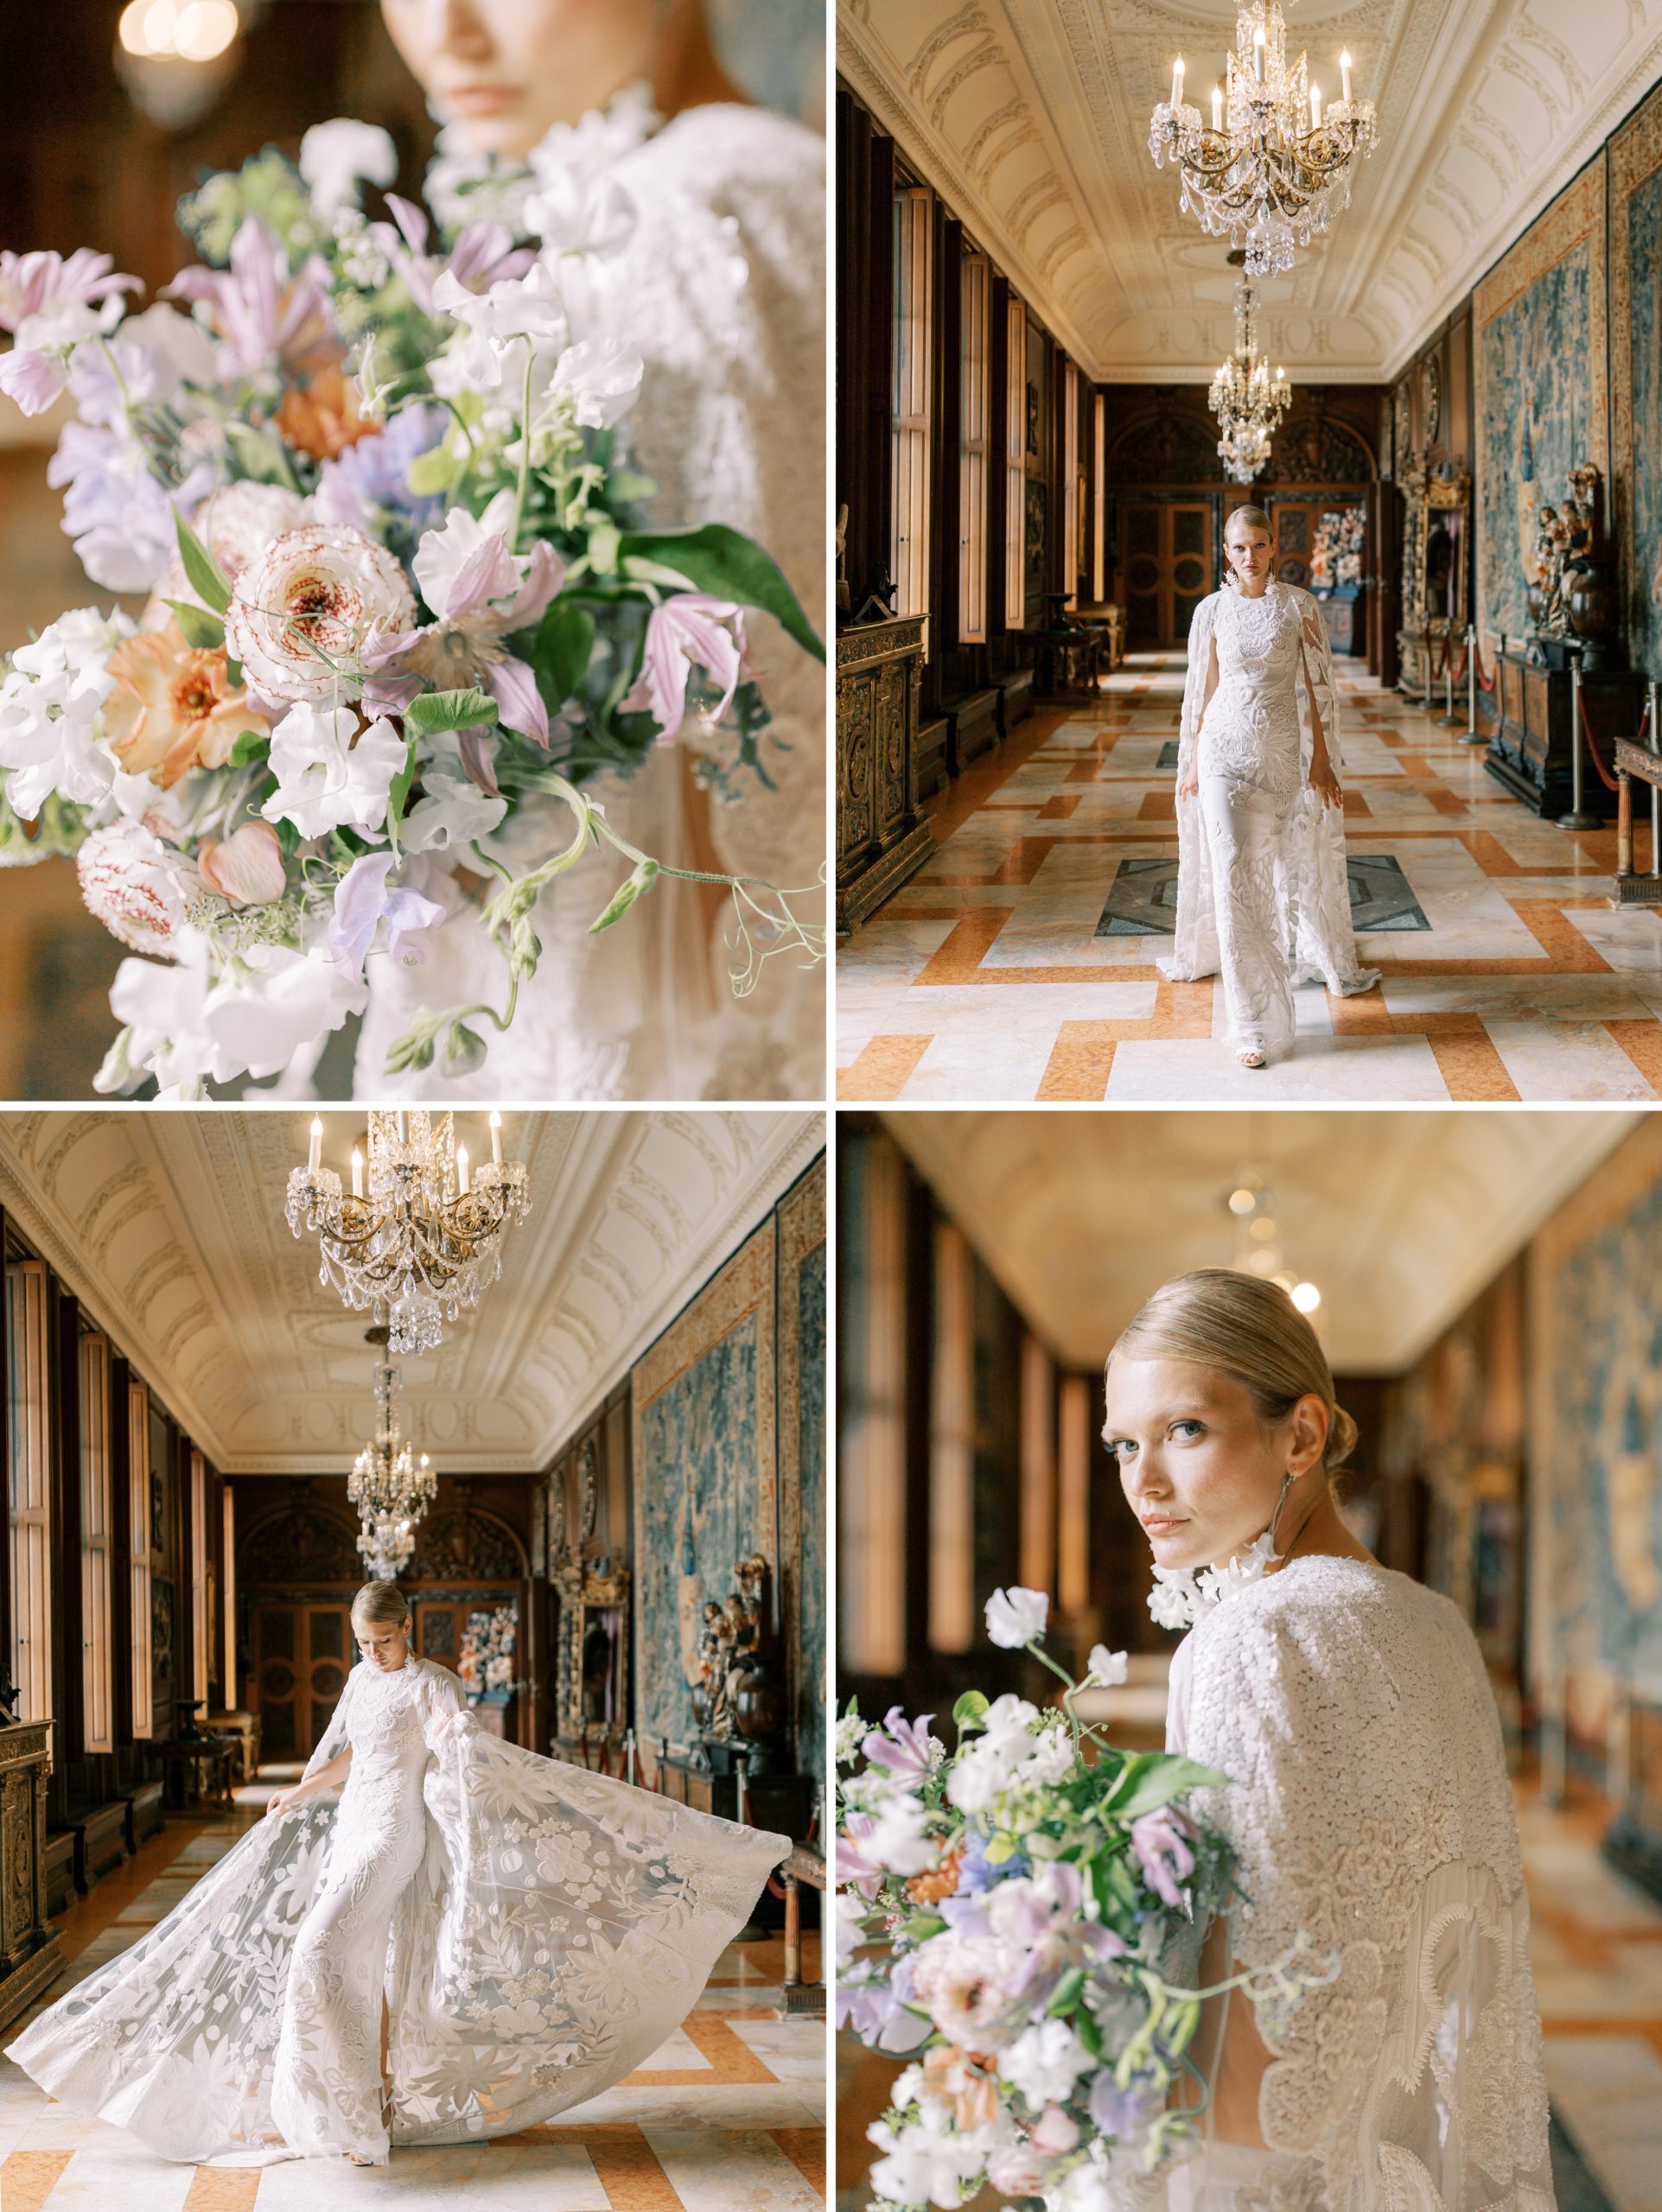 This opulent editorial photographed at The Anderson House in Washington, DC features four unique gowns by designer Naeem Khan.